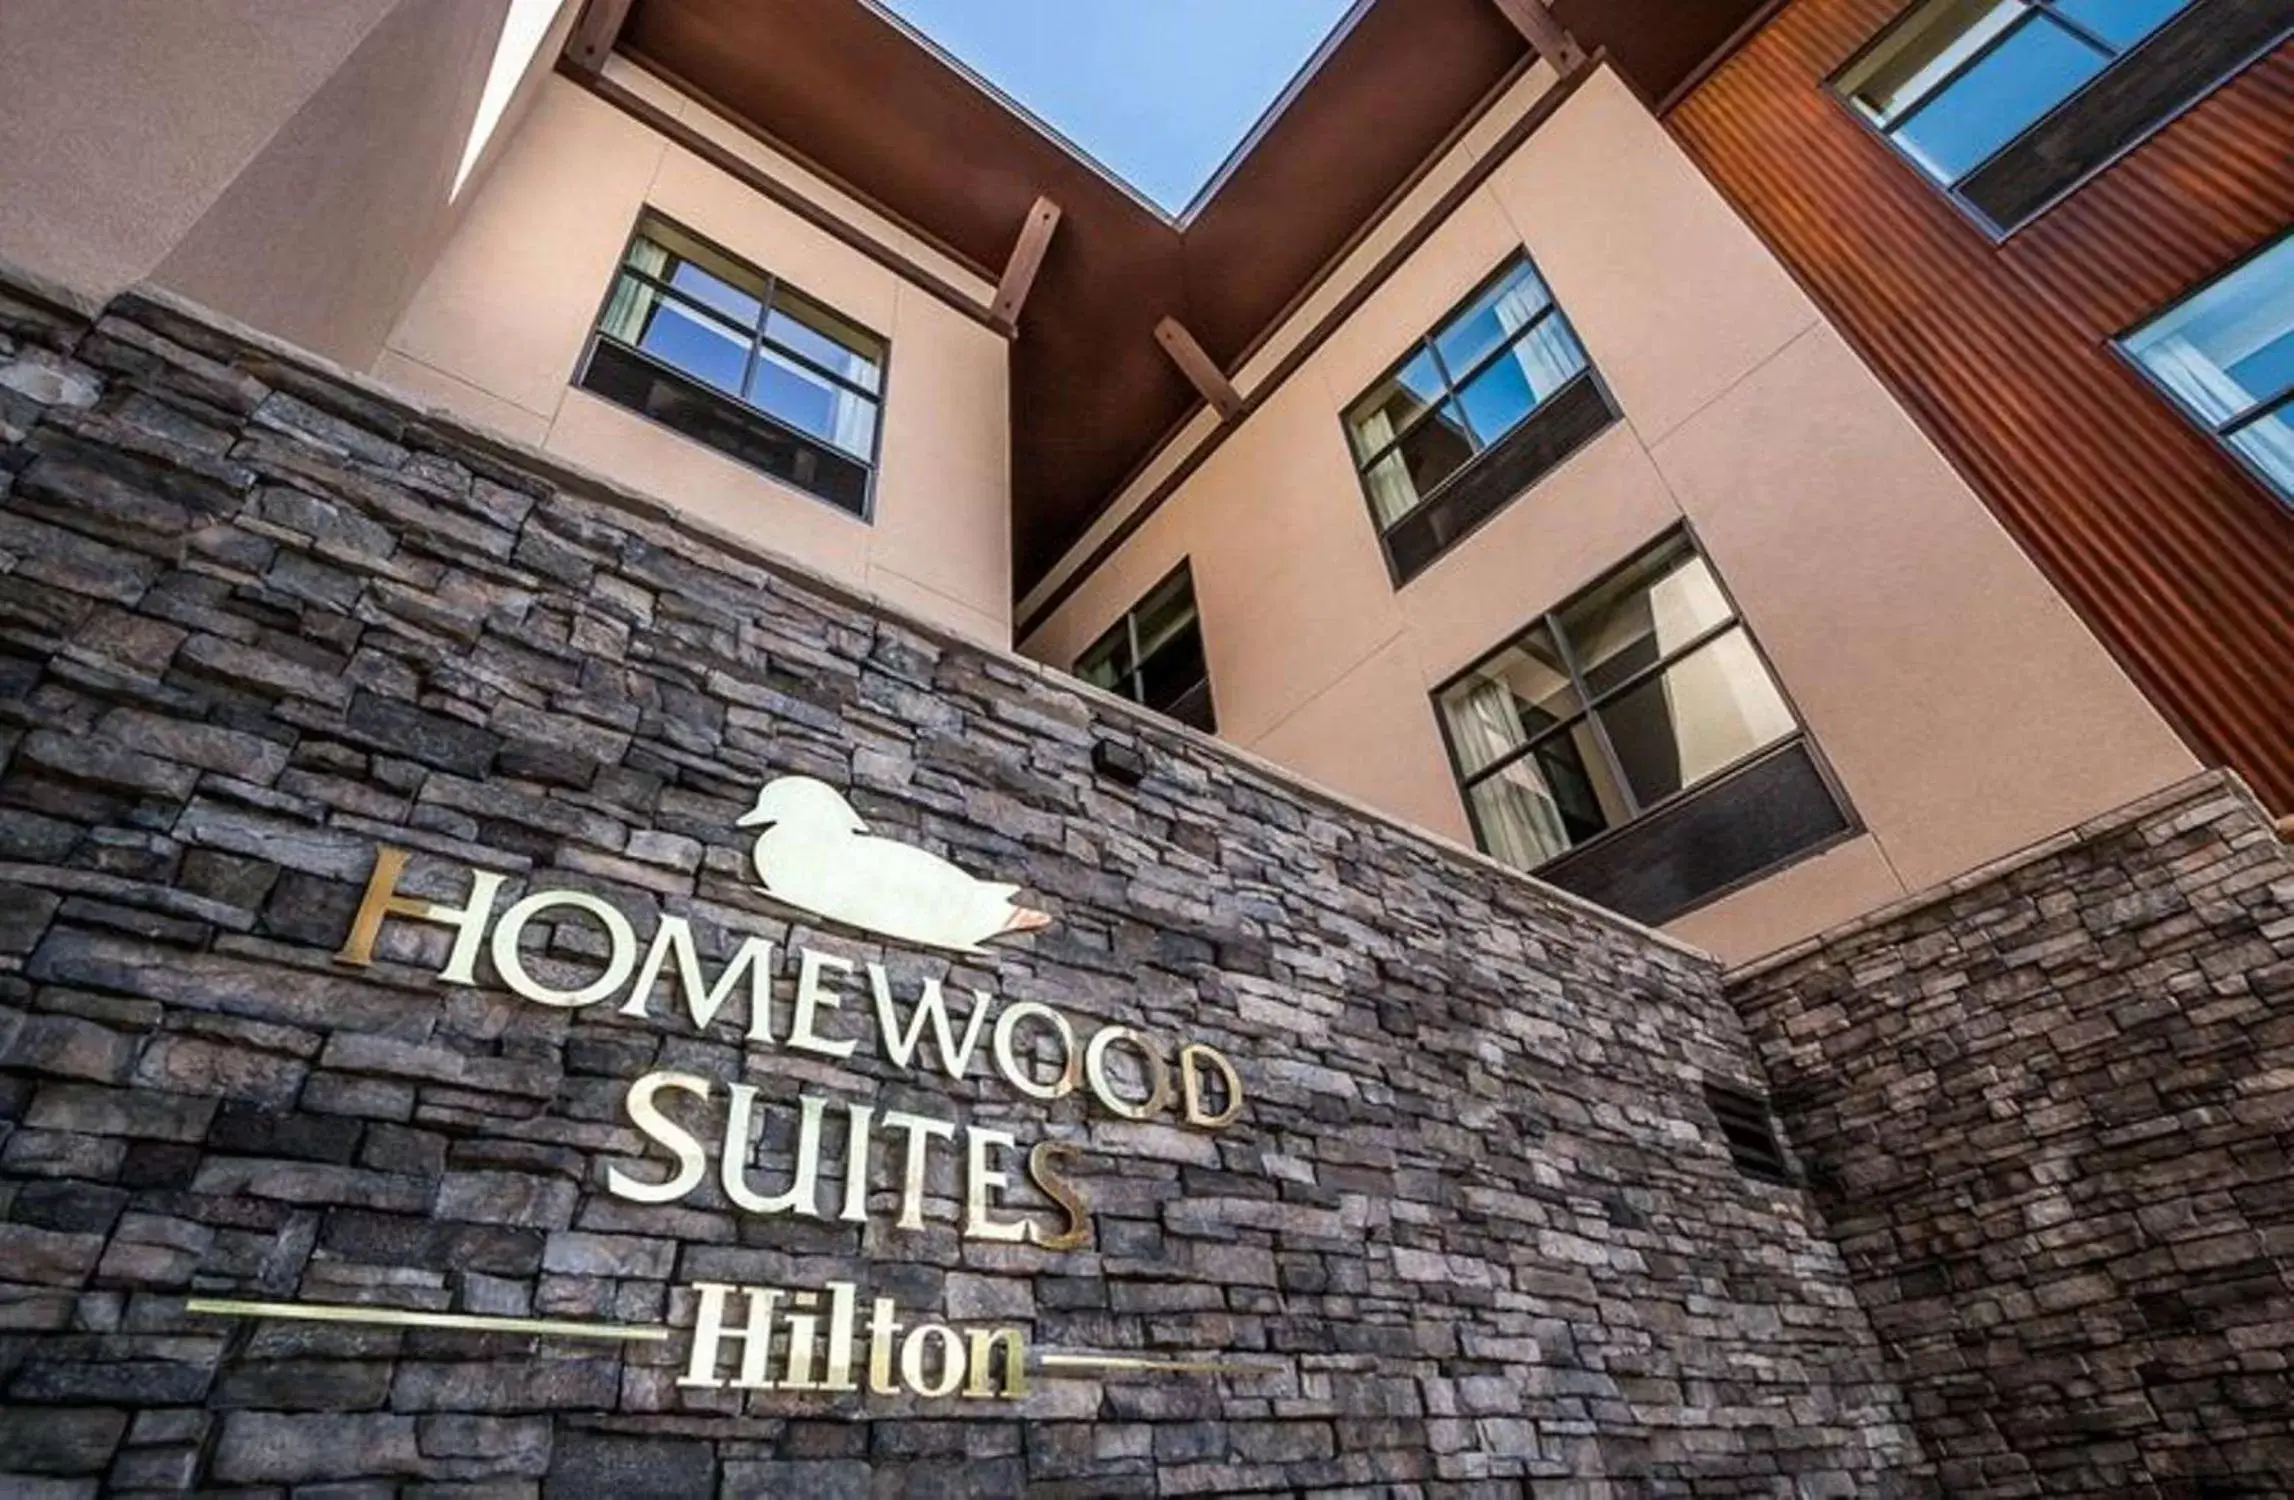 Property Building in Homewood Suites by Hilton, Durango